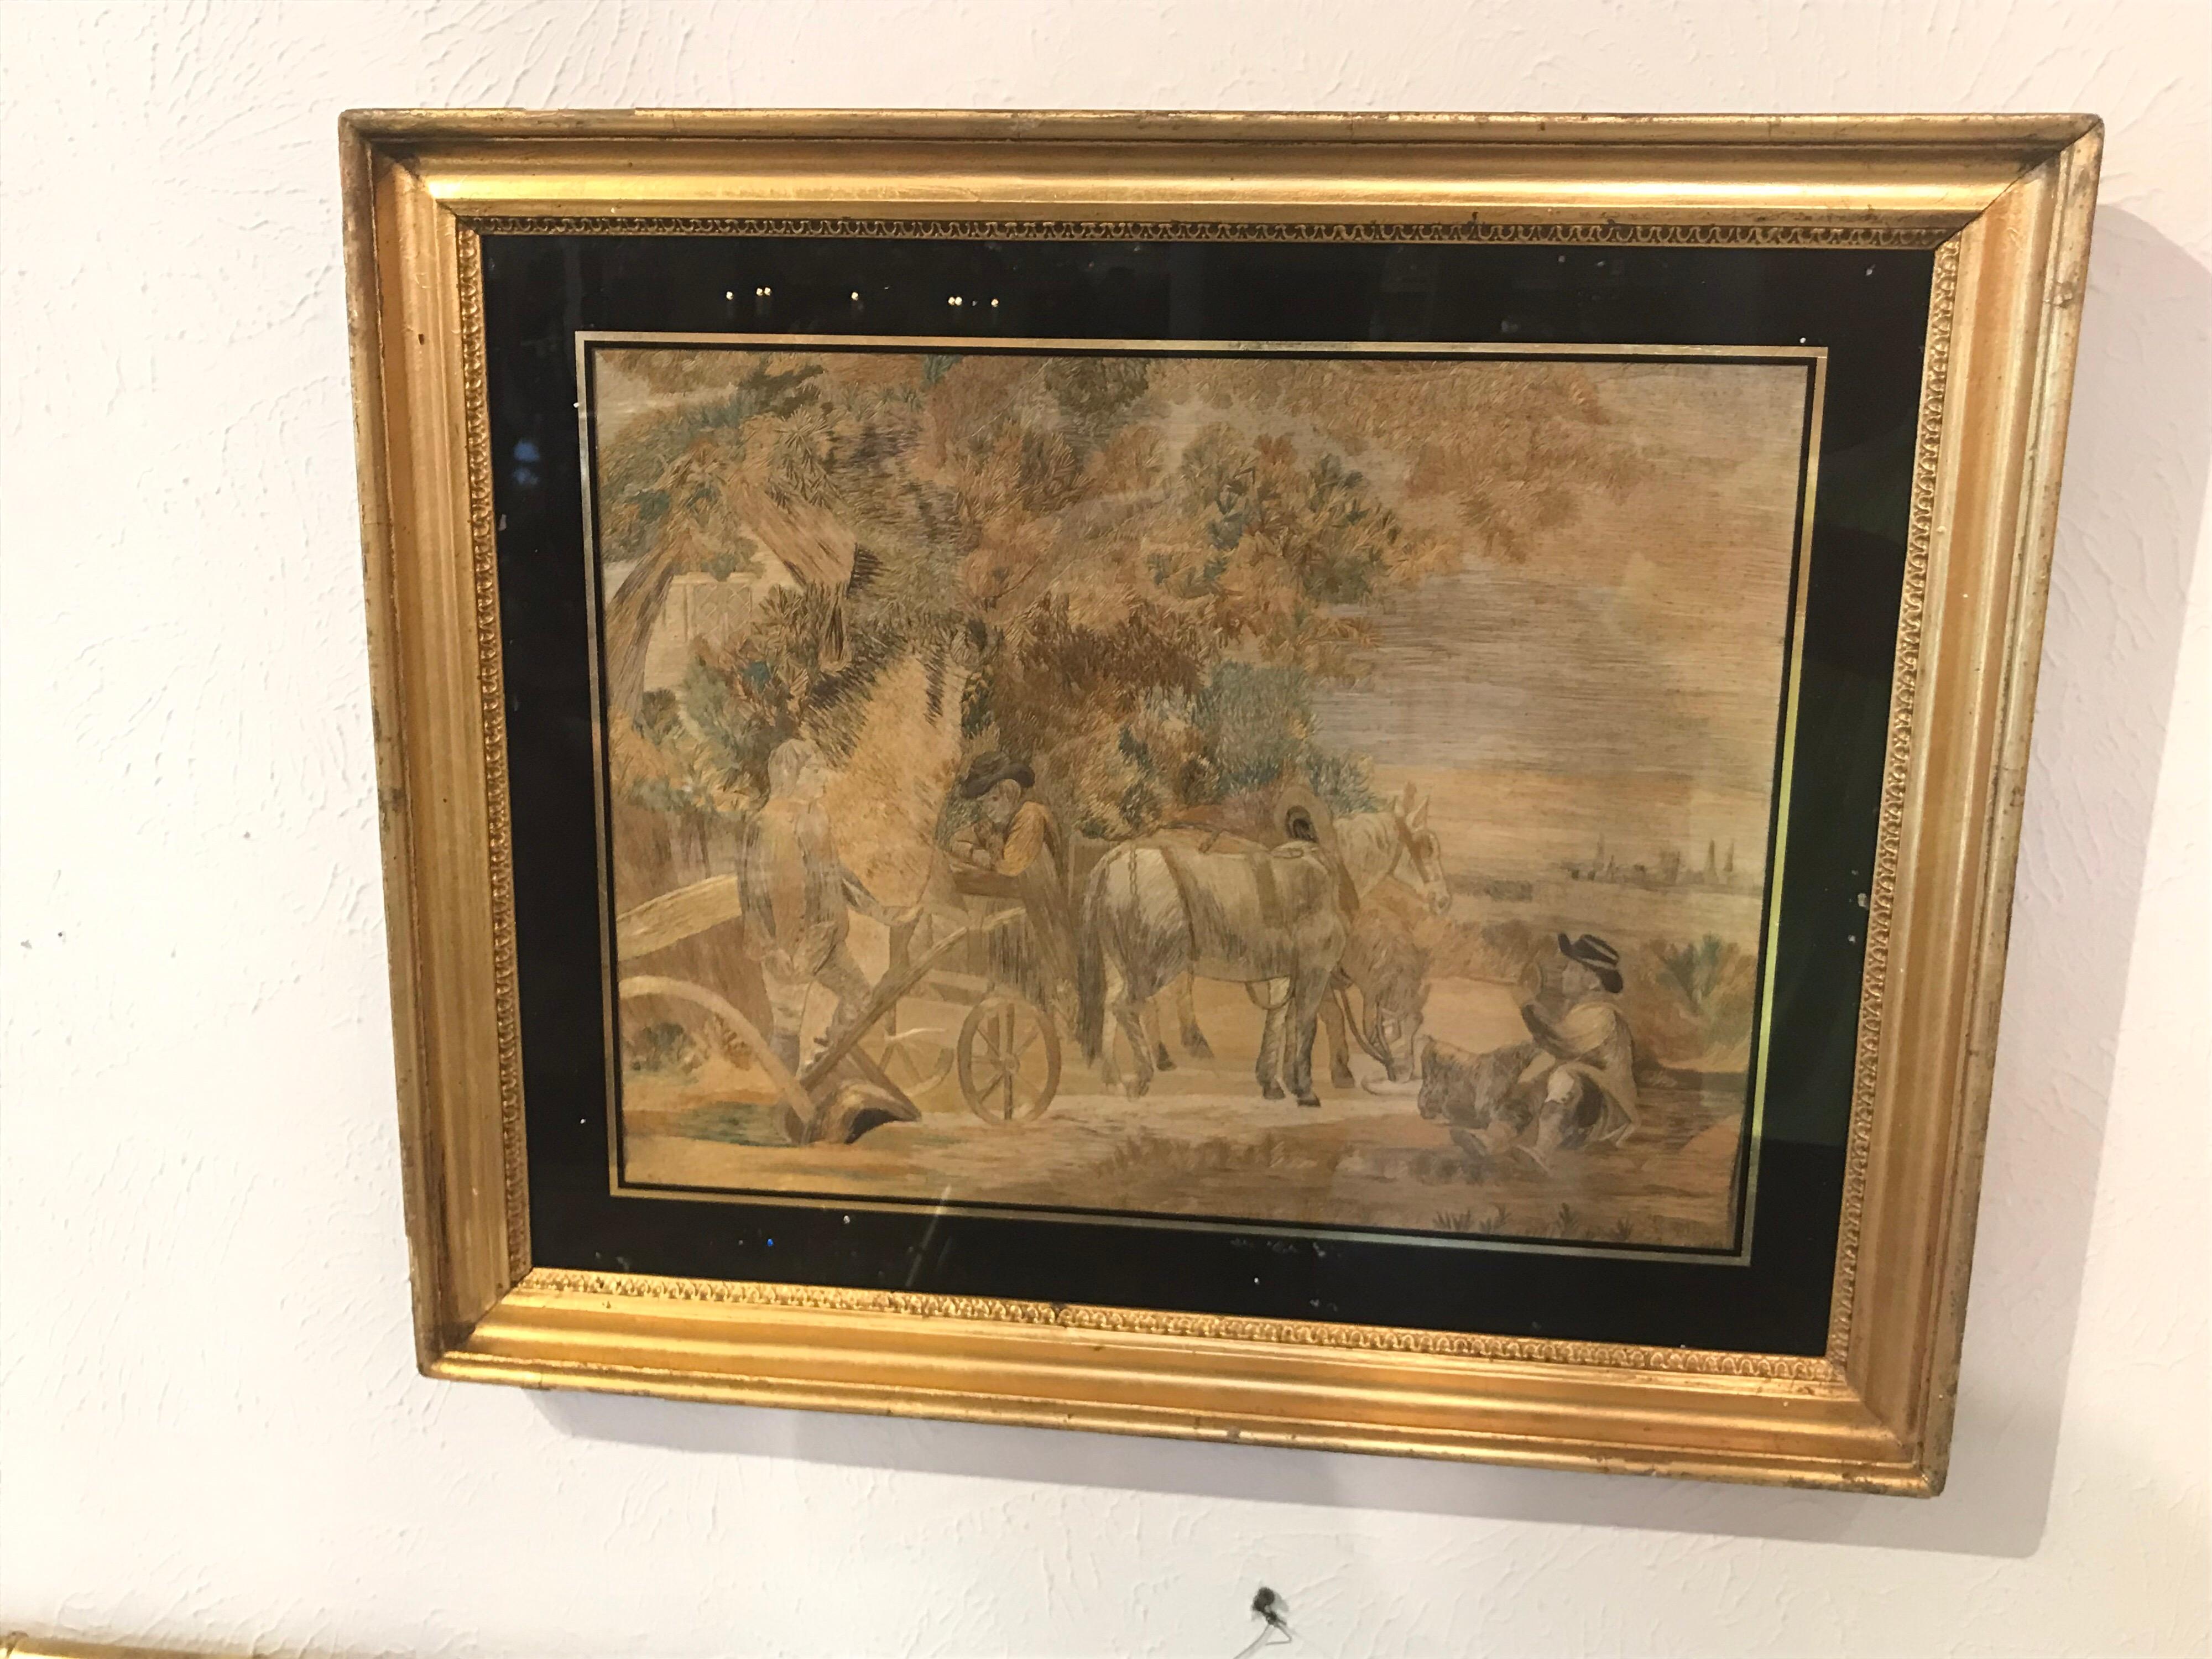 Very decorative antique silk embroidery depicting figures with a horse drawn carriage. Nicely framed in gold leaf over wood frame, with protective glass. A wonderful accessory for any Fine home. Please reach out with any questions.